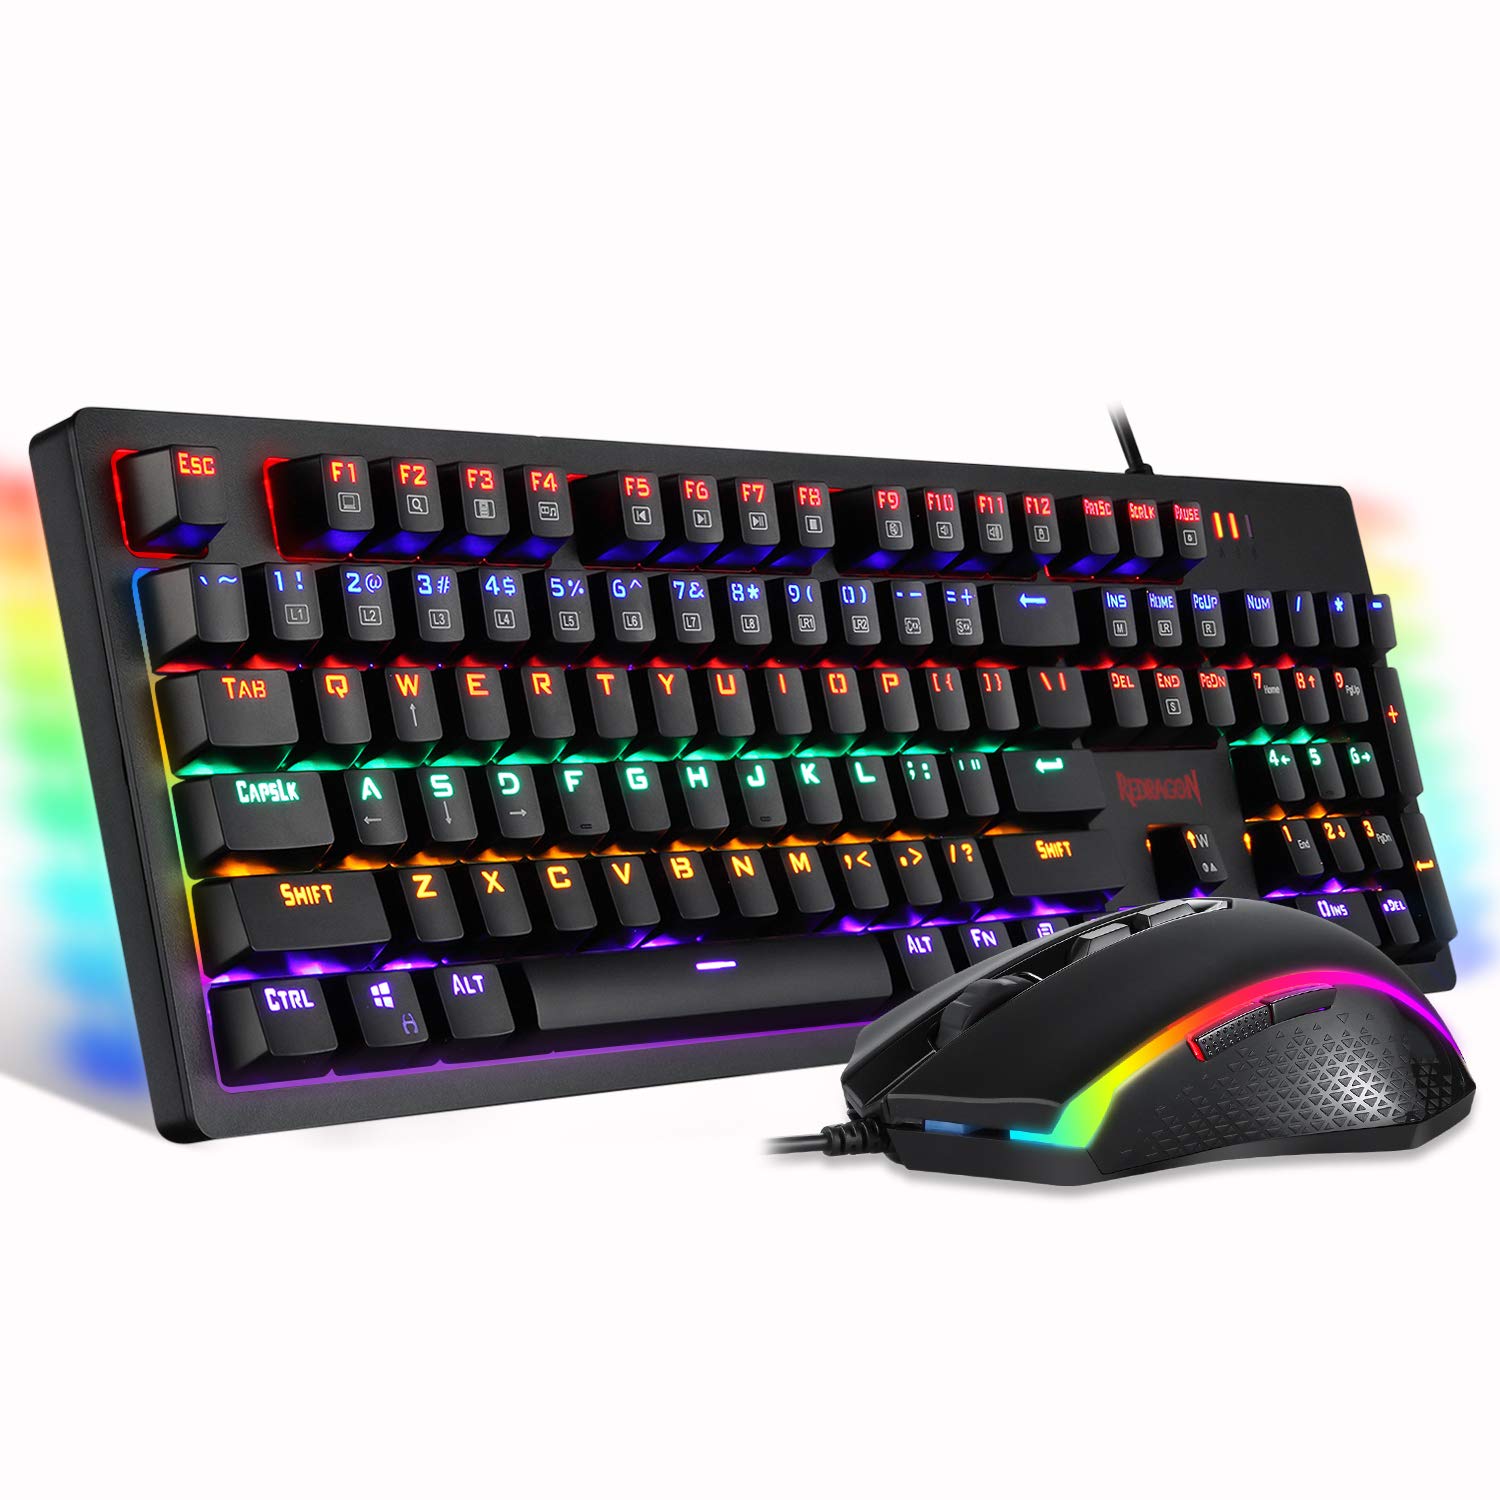 Redragon S117 Gaming Keyboard Mouse Combo Mechanical RGB Rainbow Backlit Keyboard Brown Switches RGB Gaming Mouse for Windows PC Gamers (104 Keys)